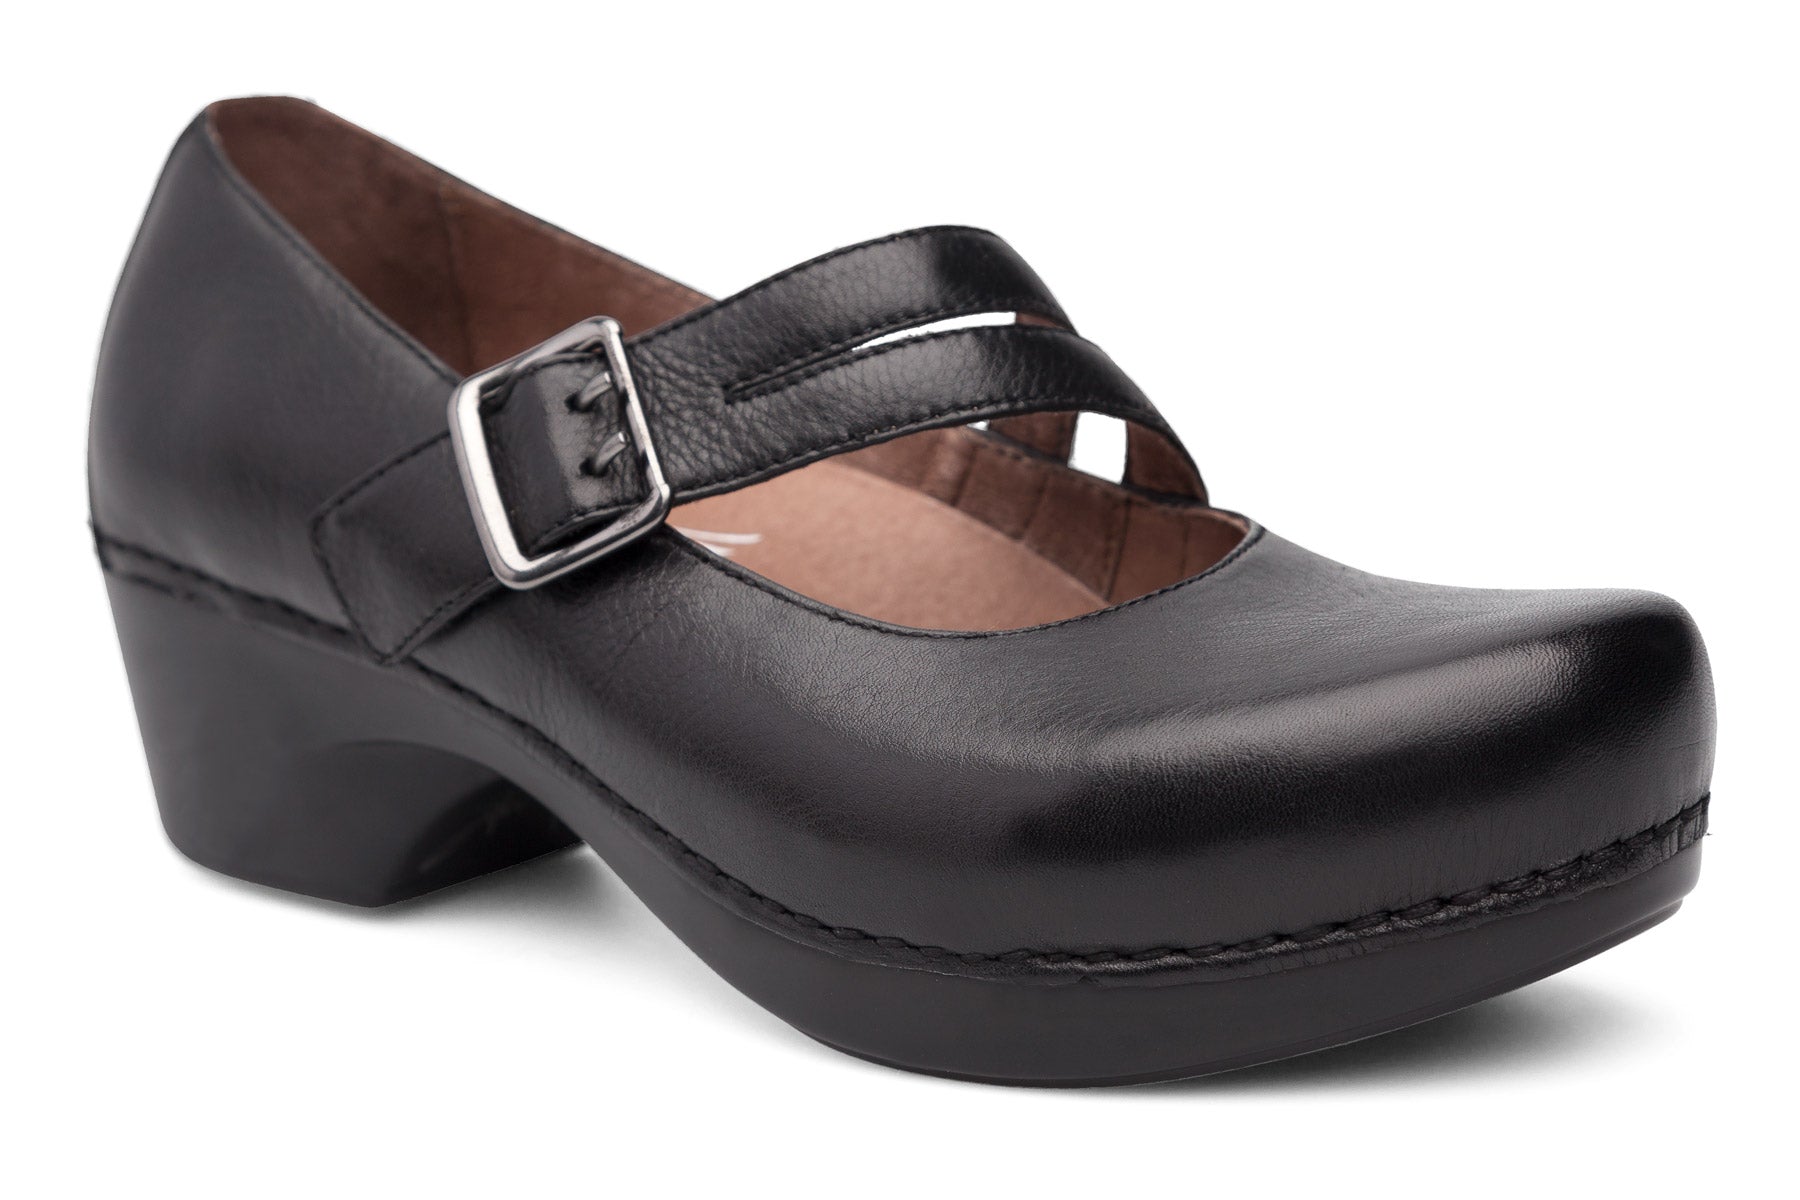 clogs and mules clearance